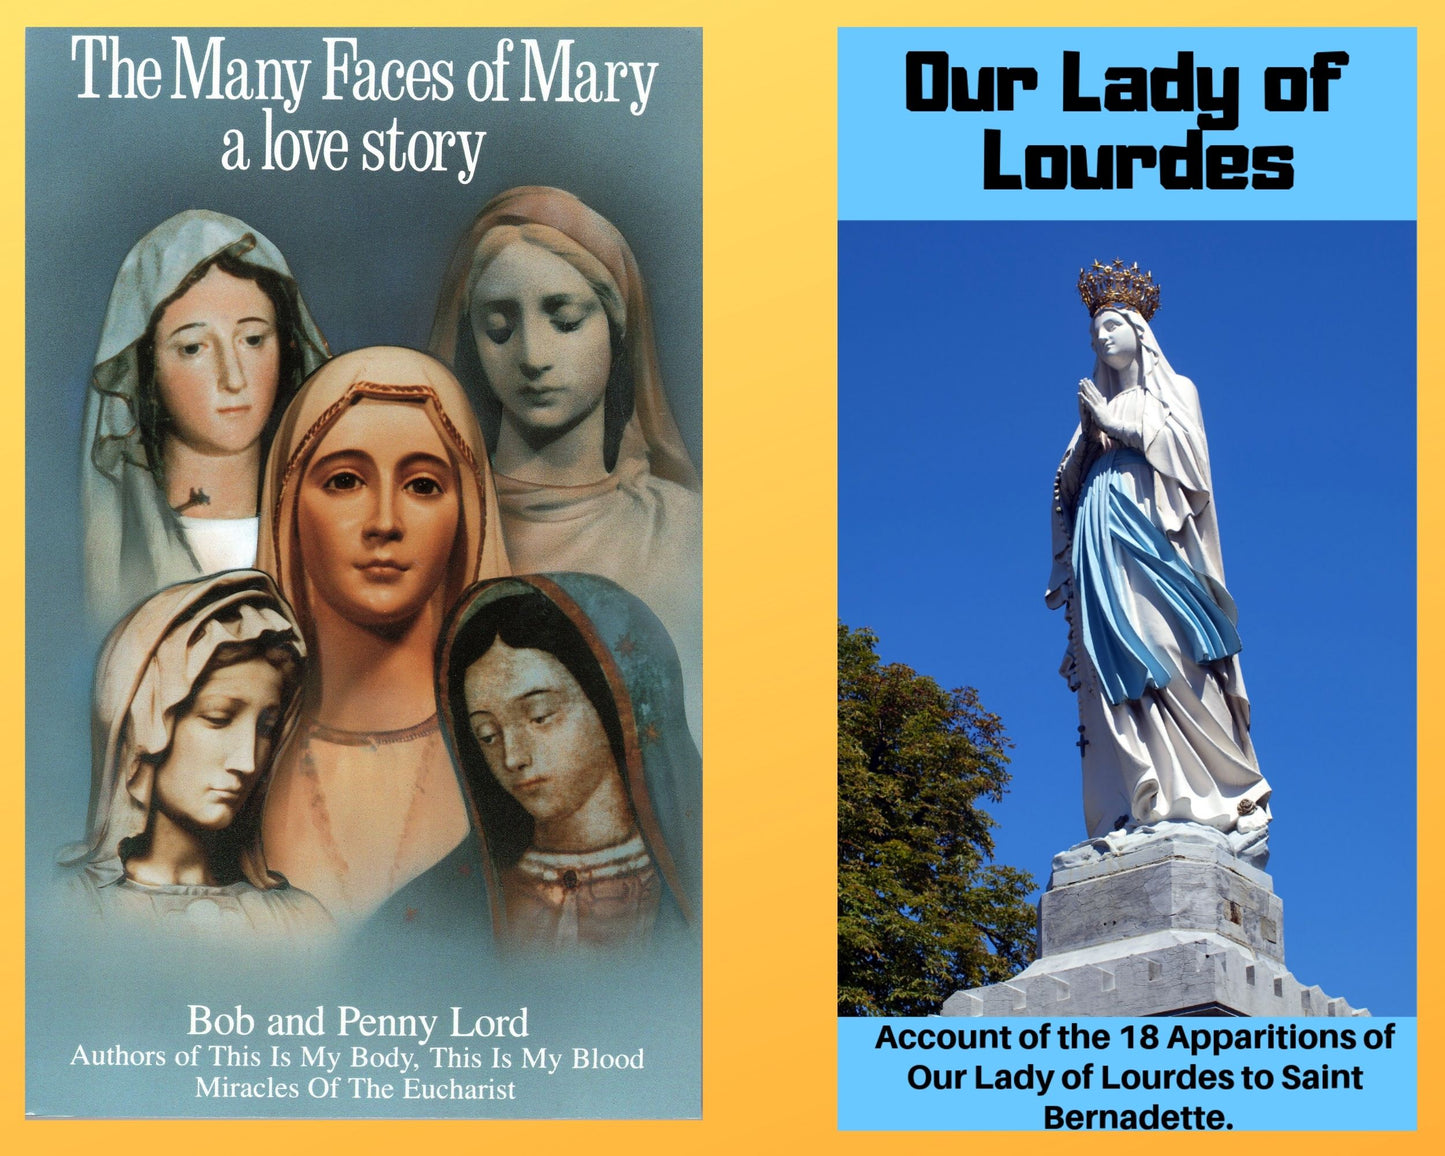 The Many Faces of Mary Book and Companion Our Lady of Lourdes DVD - Bob and Penny Lord